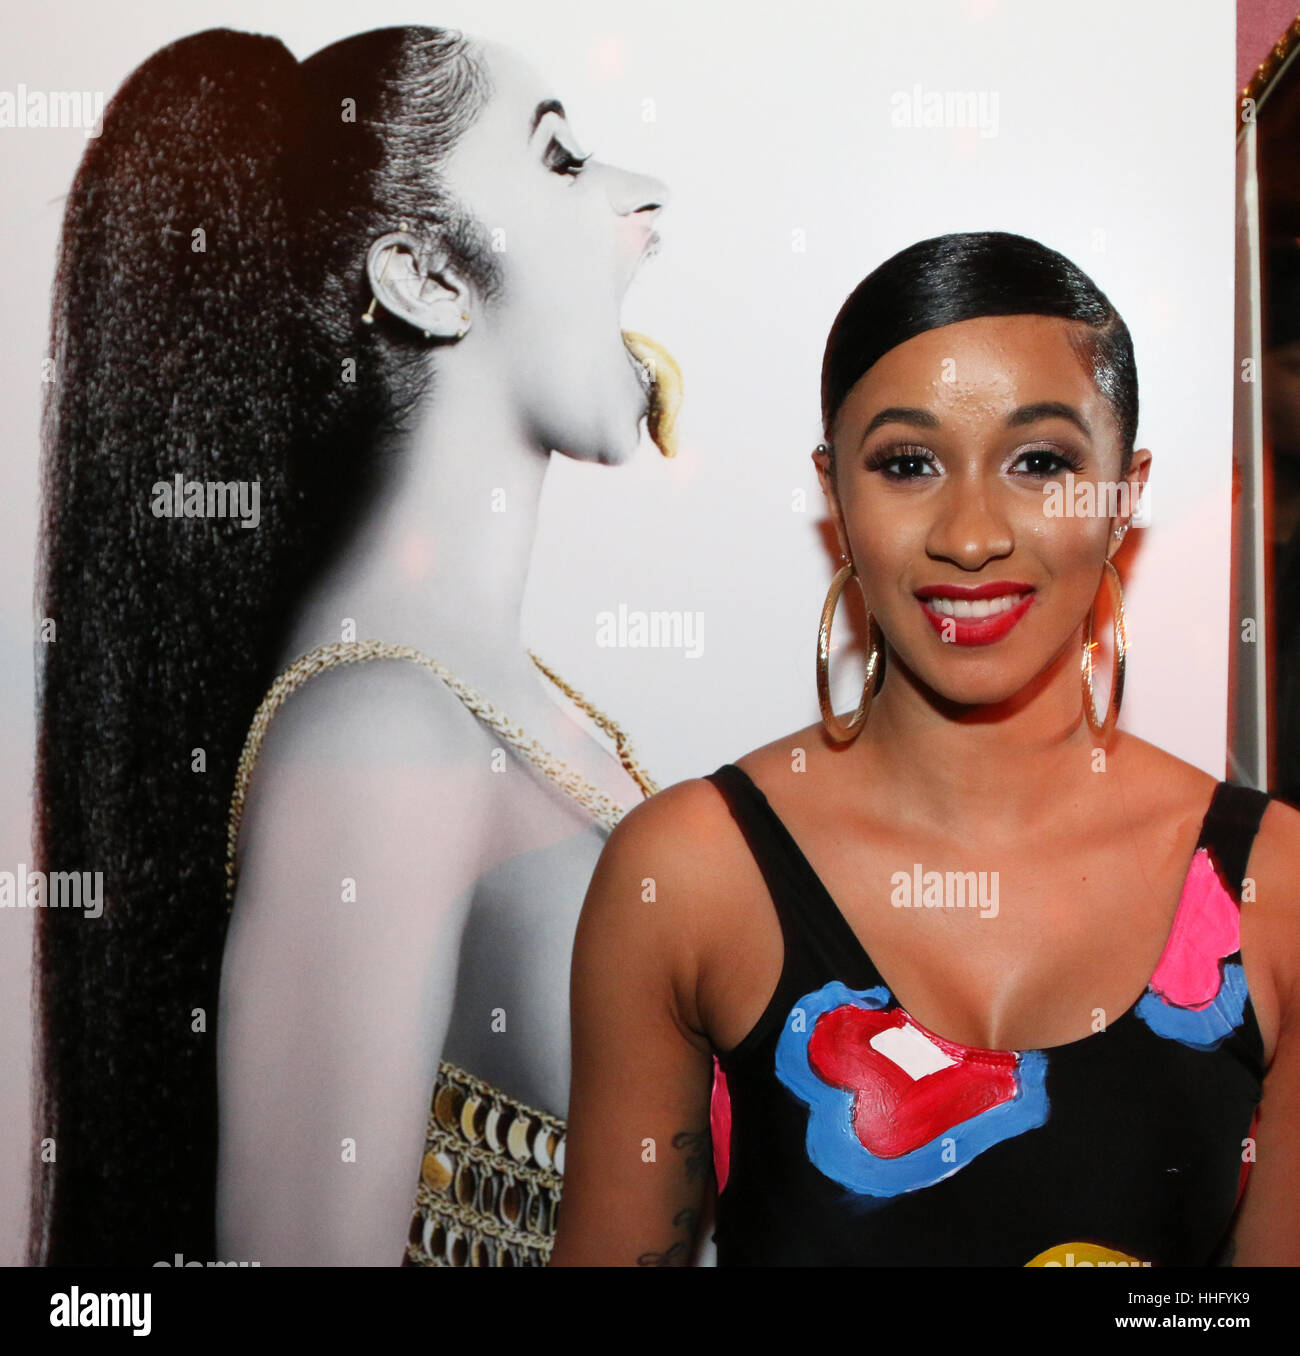 NEW YORK, NY - JANUARY 19, 2017 Cardi B attends her Gangsta Bitch Volume 2  Listening Party at The Black Lodge January 19, 2017 in New York City. Photo  Credit: Walik Goshorn / Mediapunch Stock Photo - Alamy